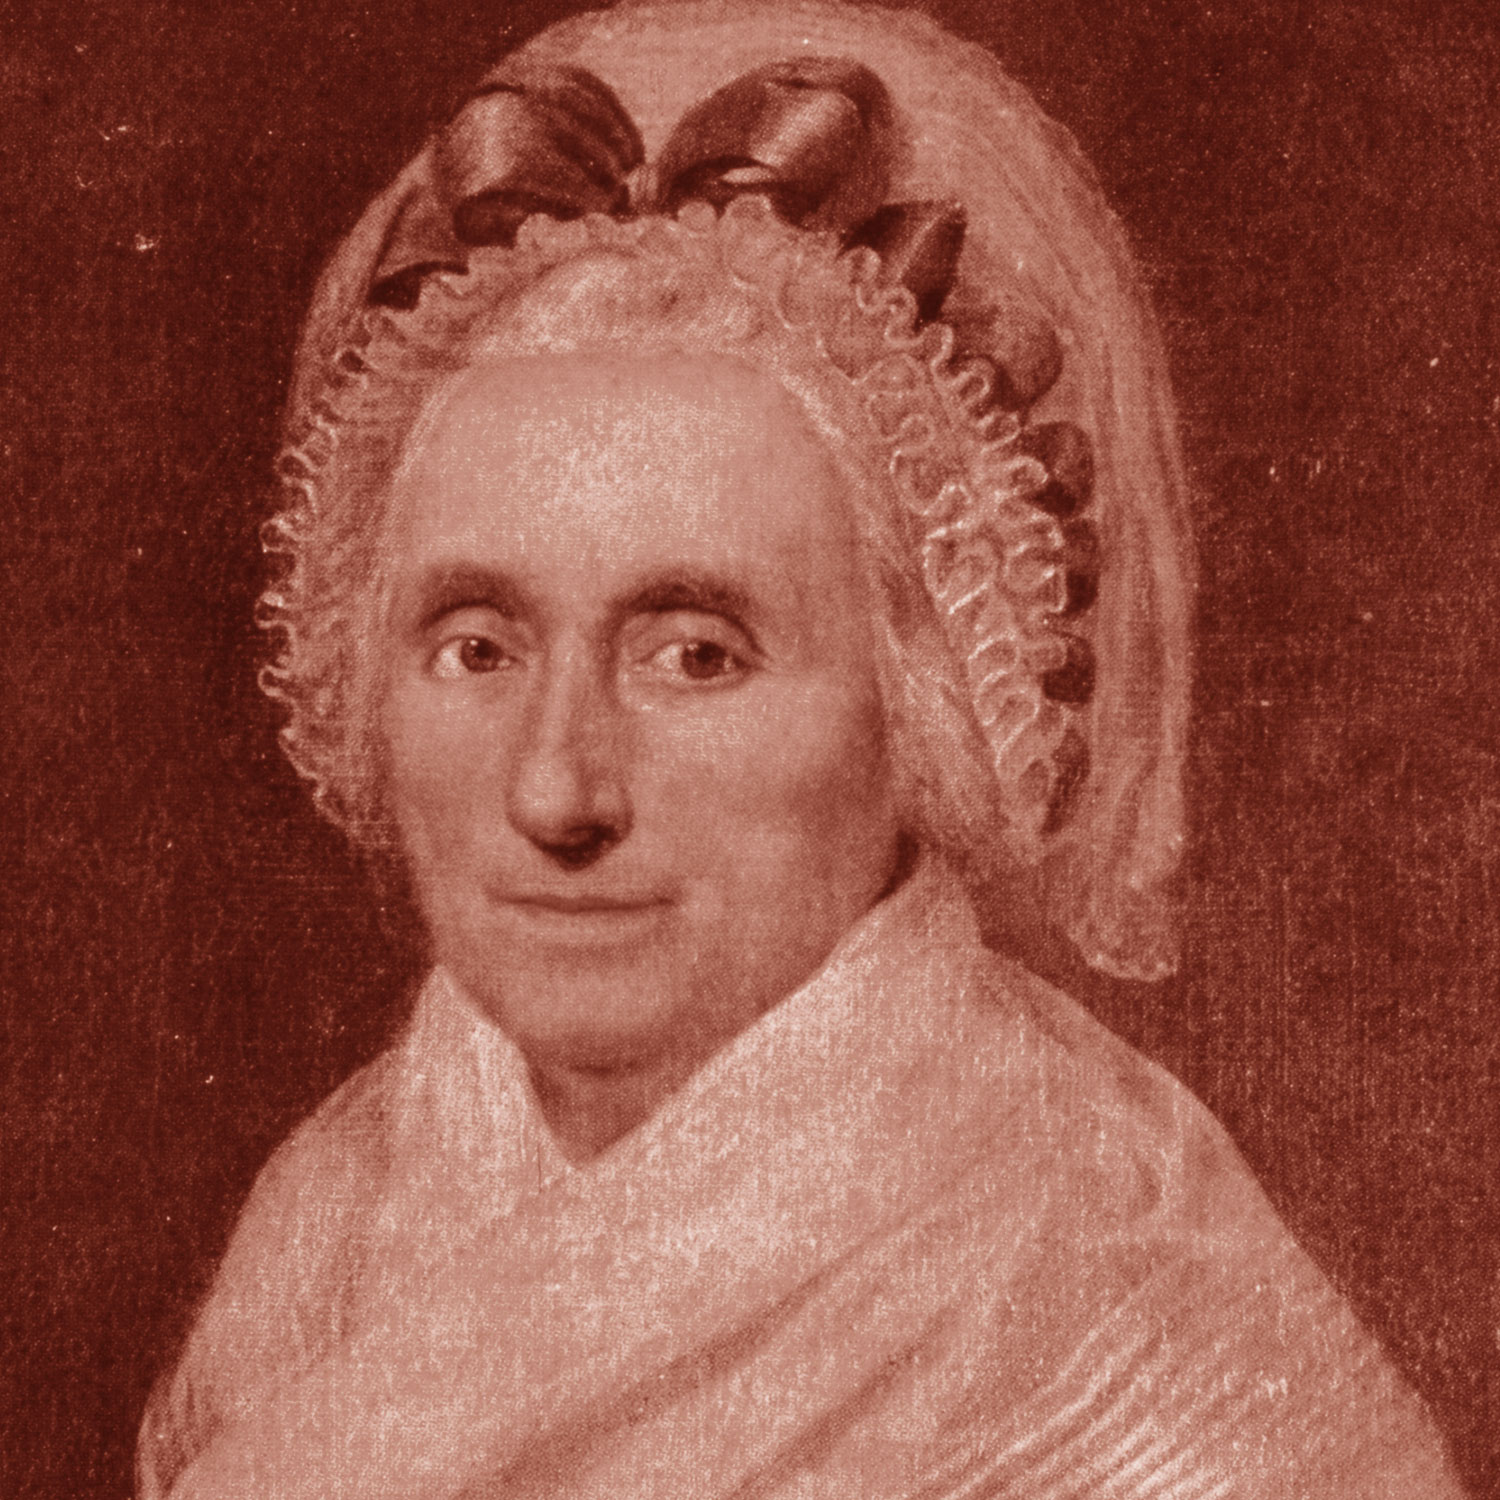 The mother who made George Washington miserable